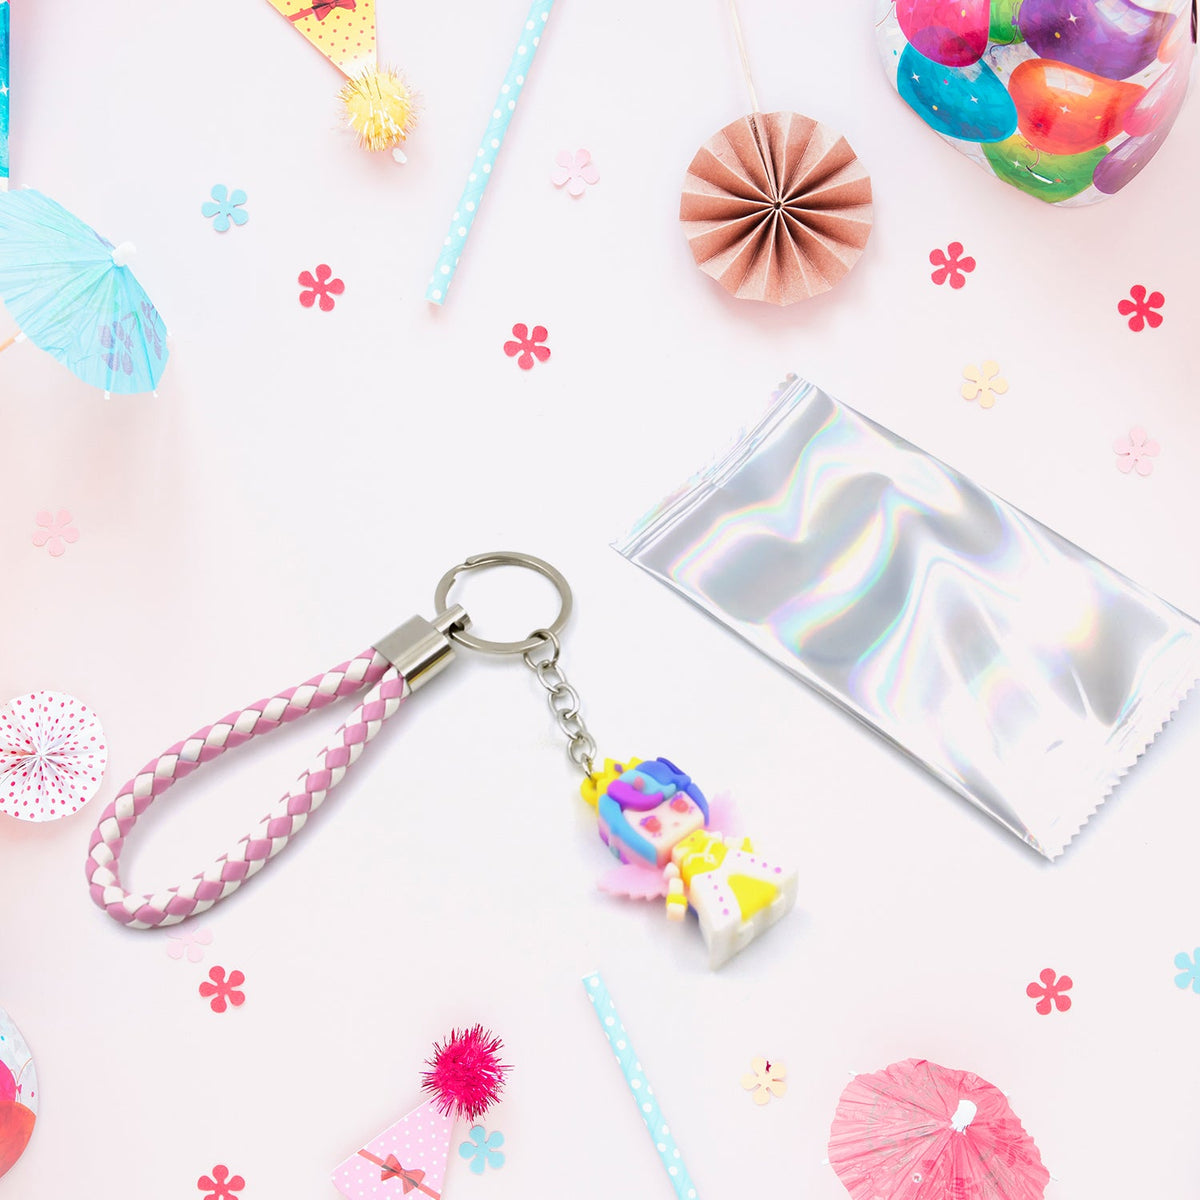 8837 Cute Keychain With Card Gift - Keychain Accessories Key Chain Backpack Charms Car Keys Keychain for Kids Girls, Unicorn Toy and Charm Key- Chain for Bag  / Door Key- Ring / car Key- Ring / Party Favor (Mix Color & Design 1 Pc )